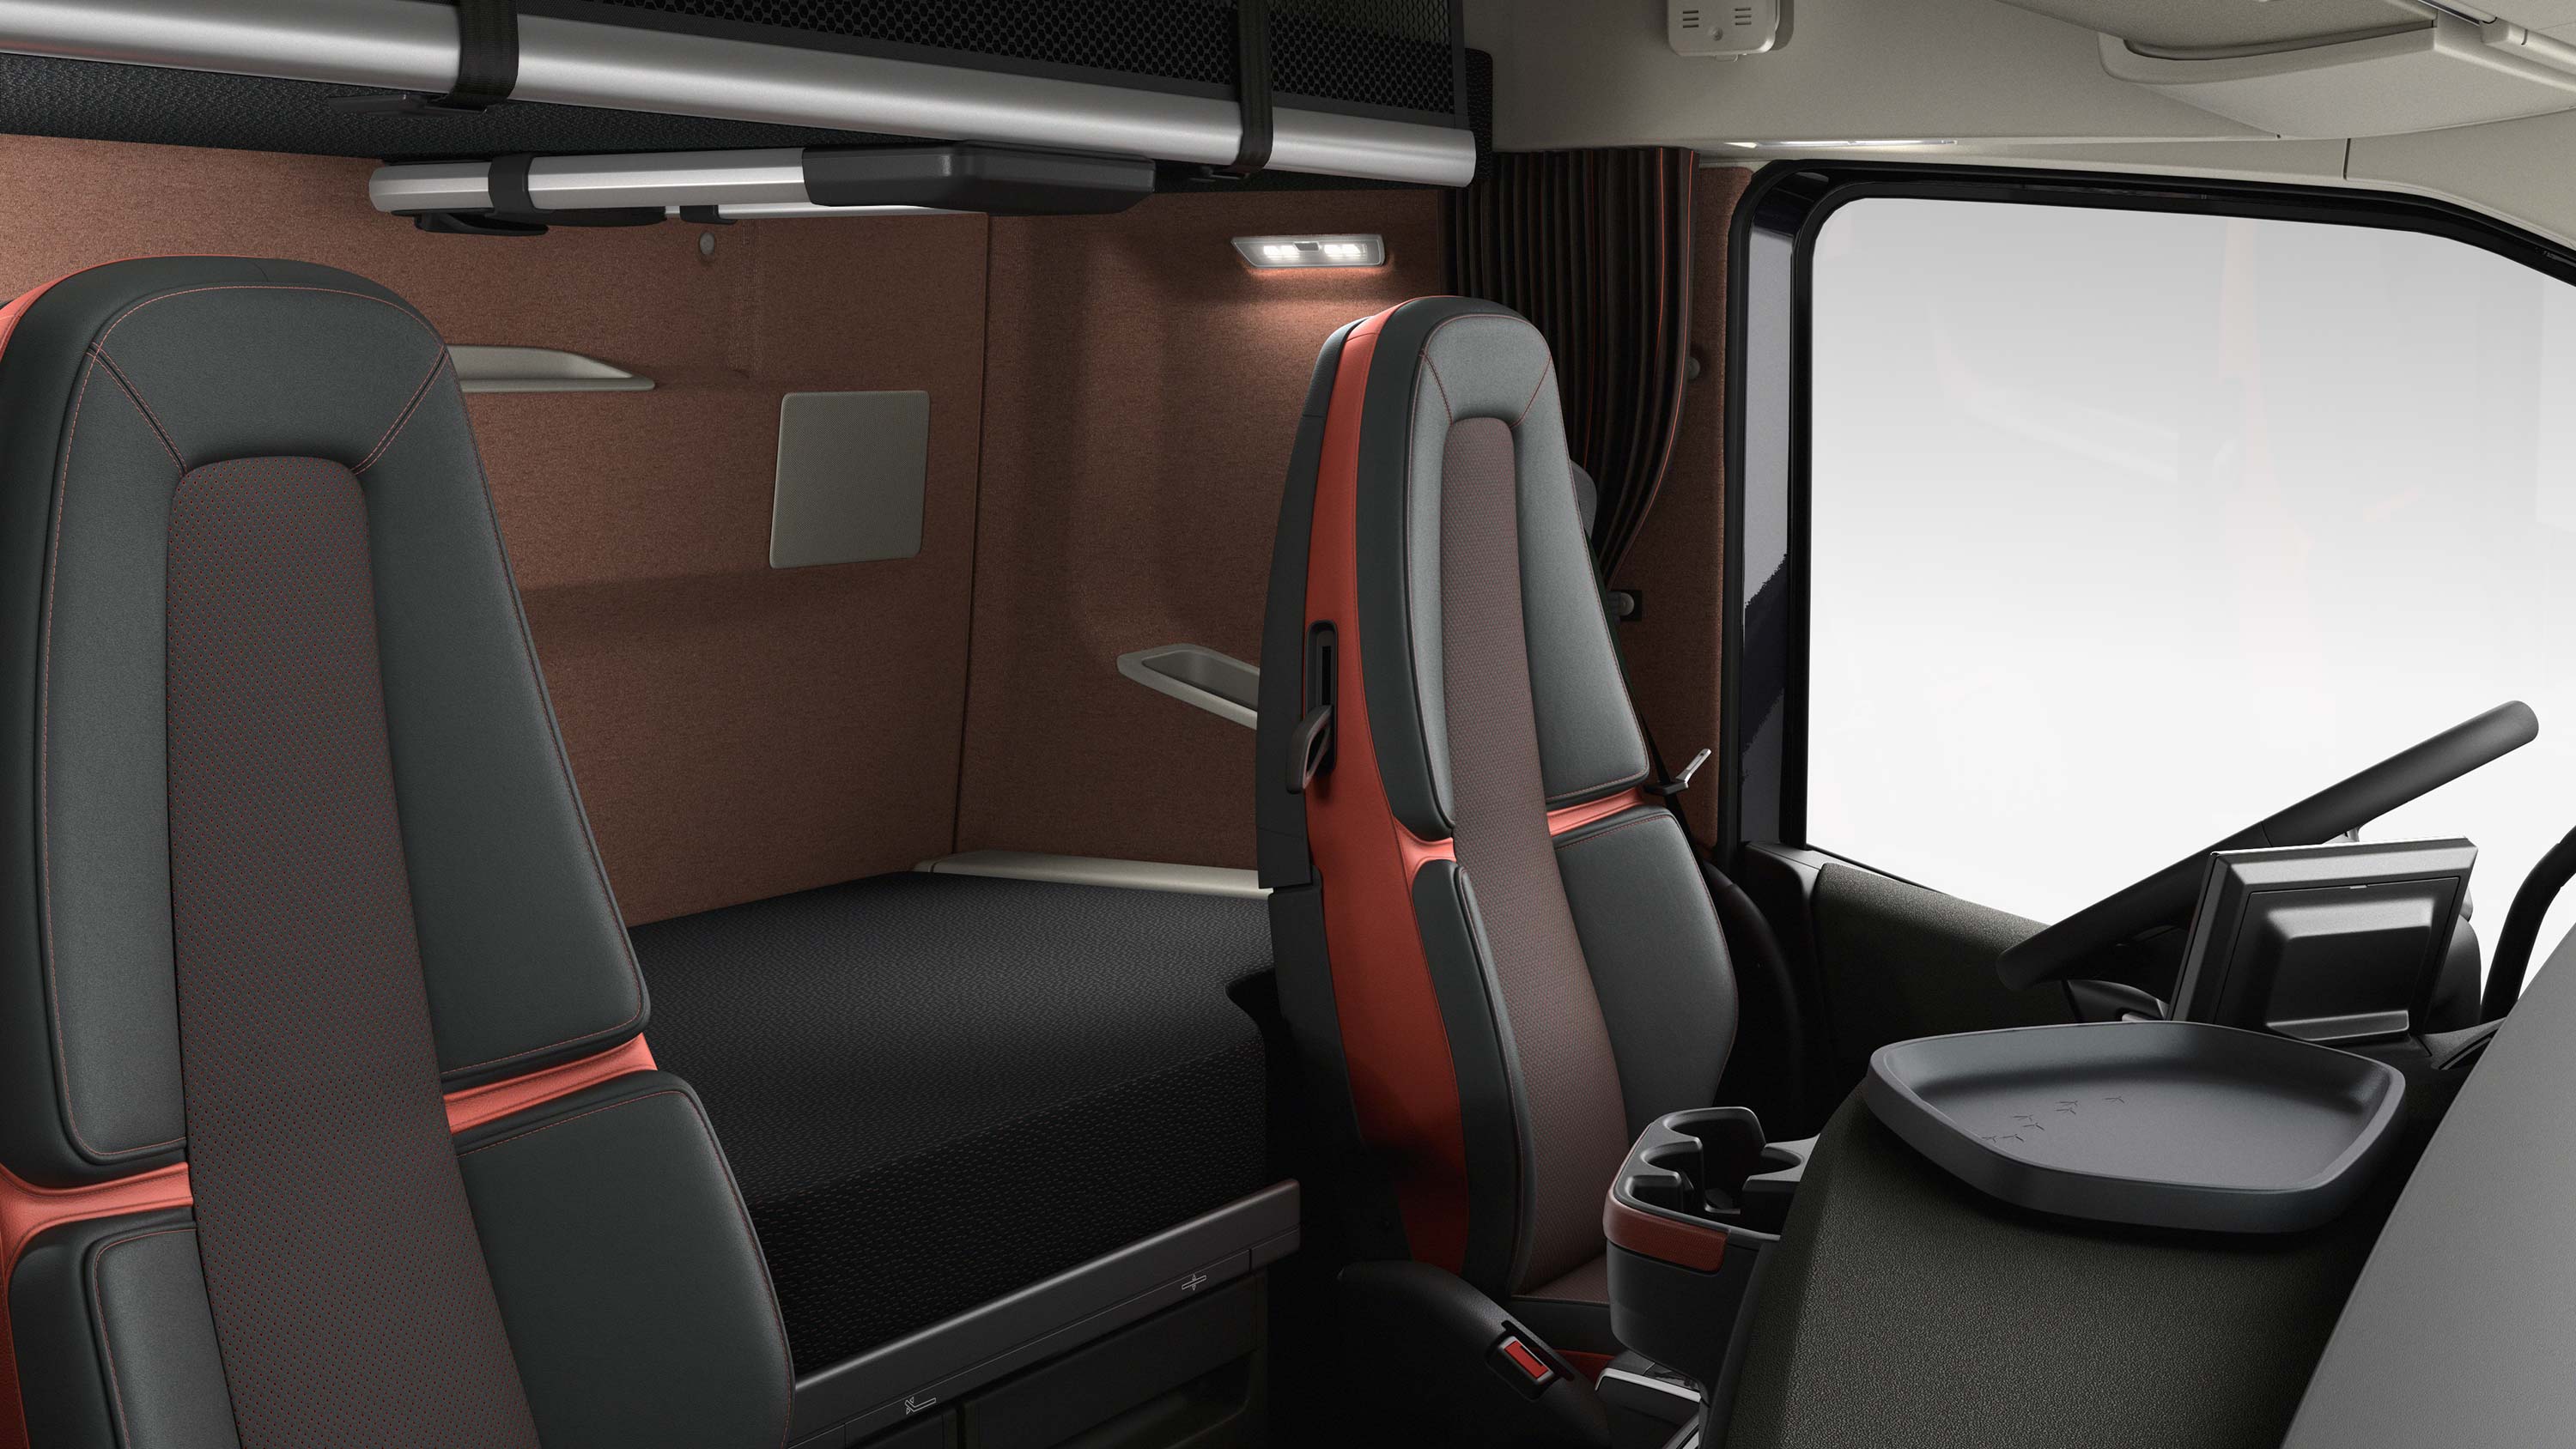 The Volvo FH16 offers comfortable resting facilities.